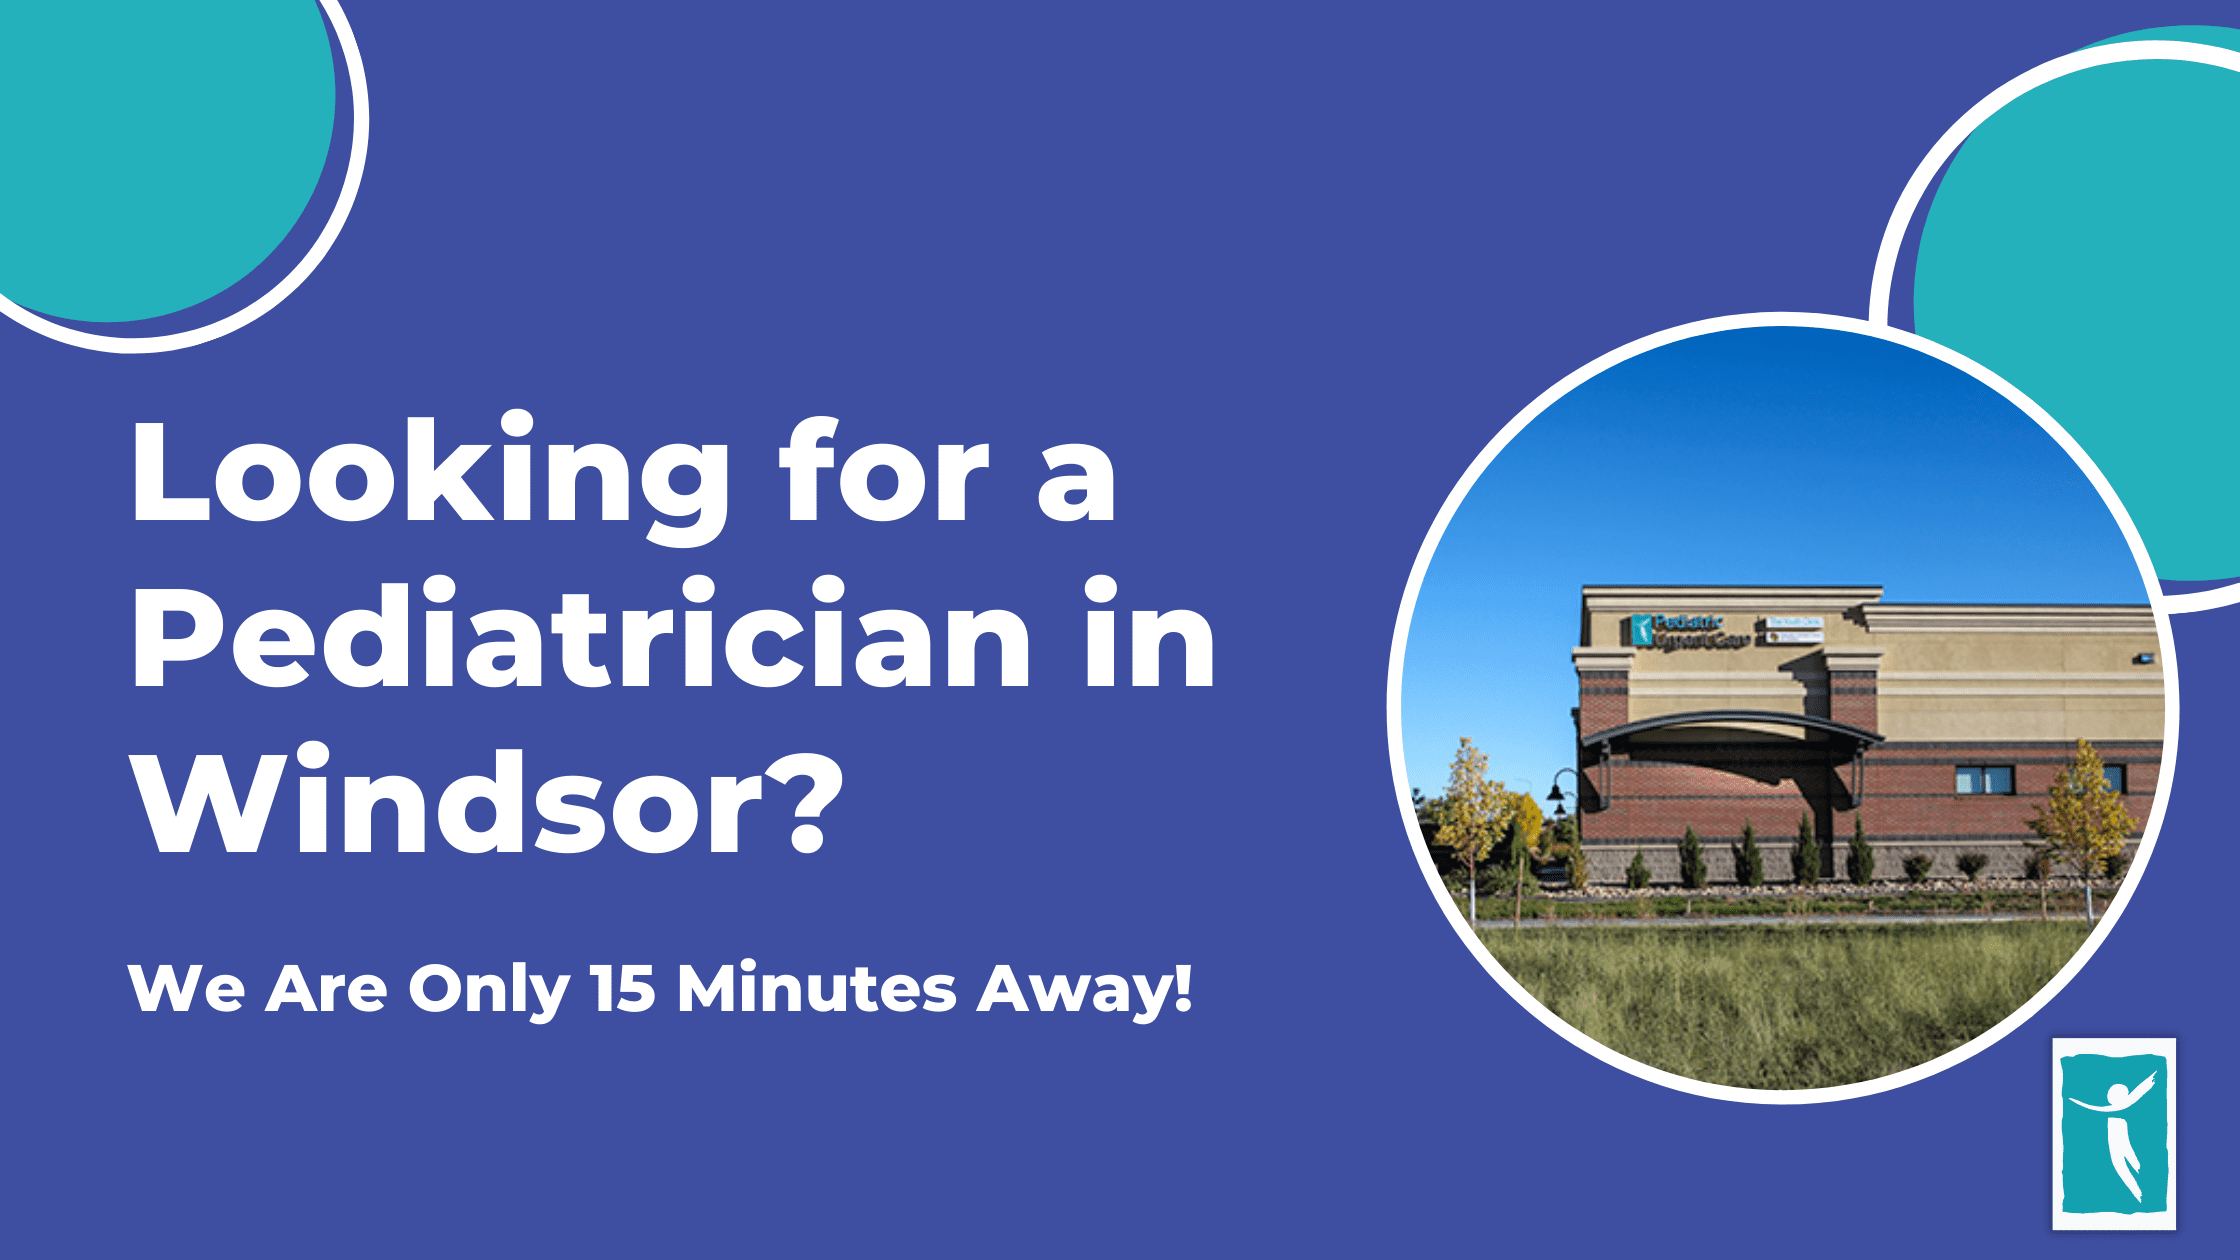 Looking for a Pediatrician in Windsor? The Youth Clinic is Only 15 Minutes Away!